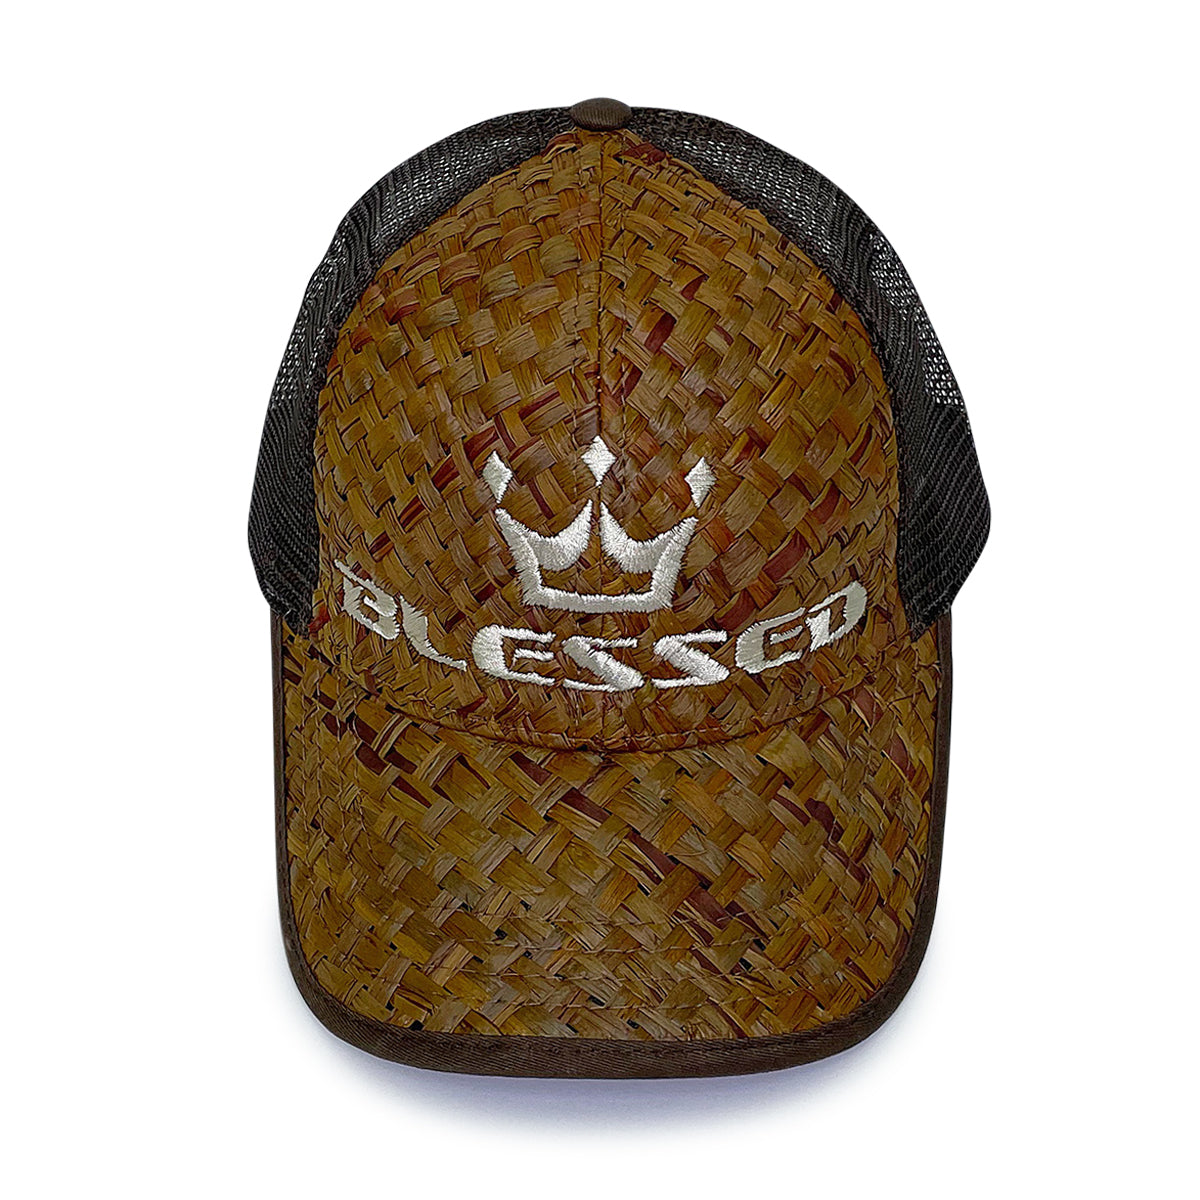 Blessed “Lauhala-style” Woven SB Hat